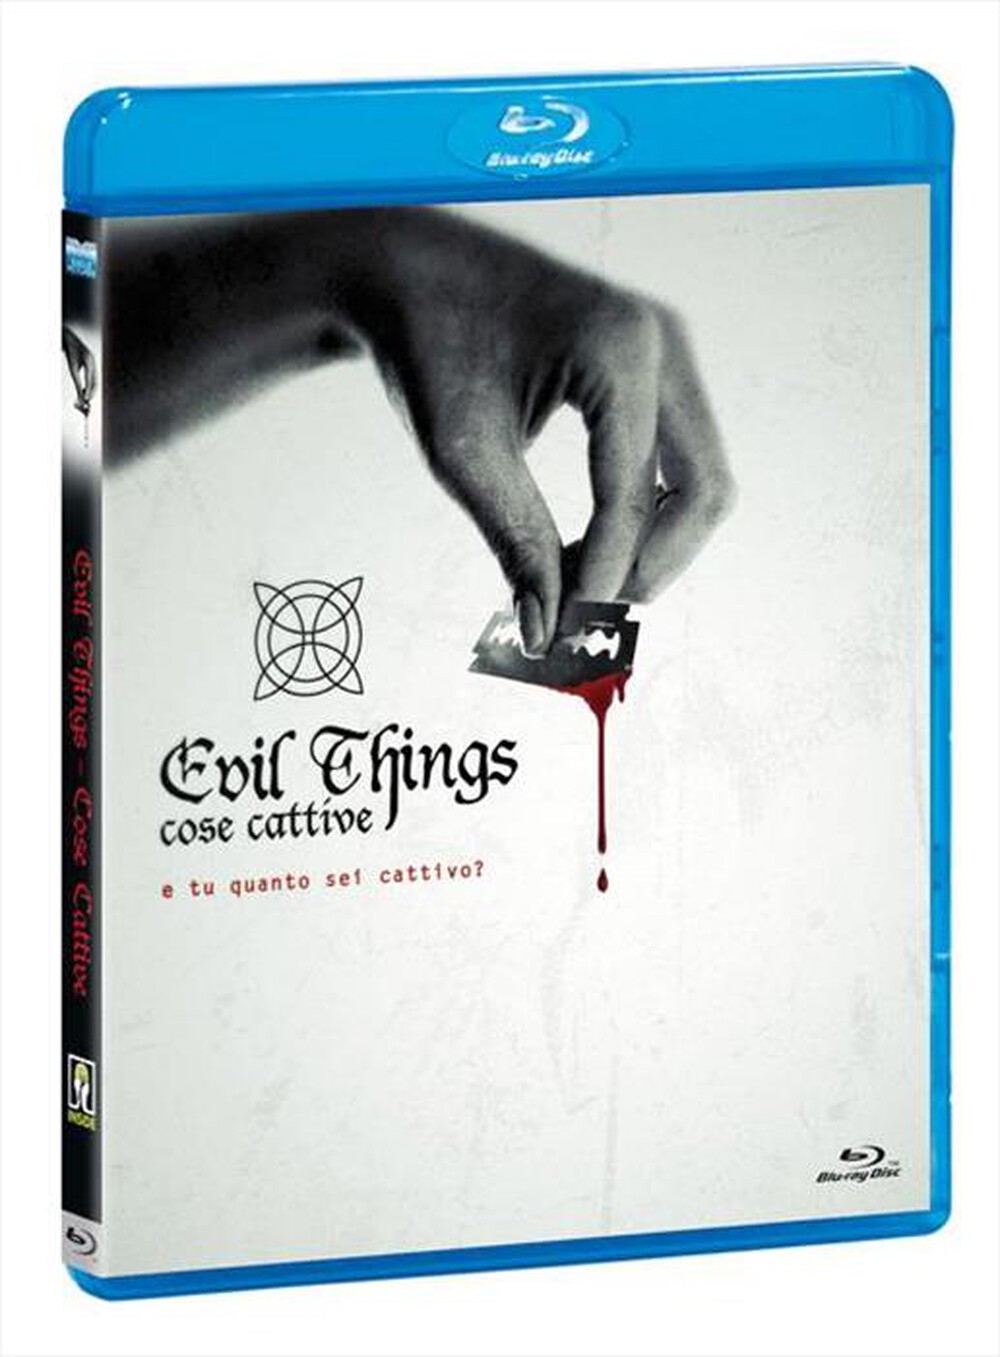 "EAGLE PICTURES - Evil Things - Cose Cattive"